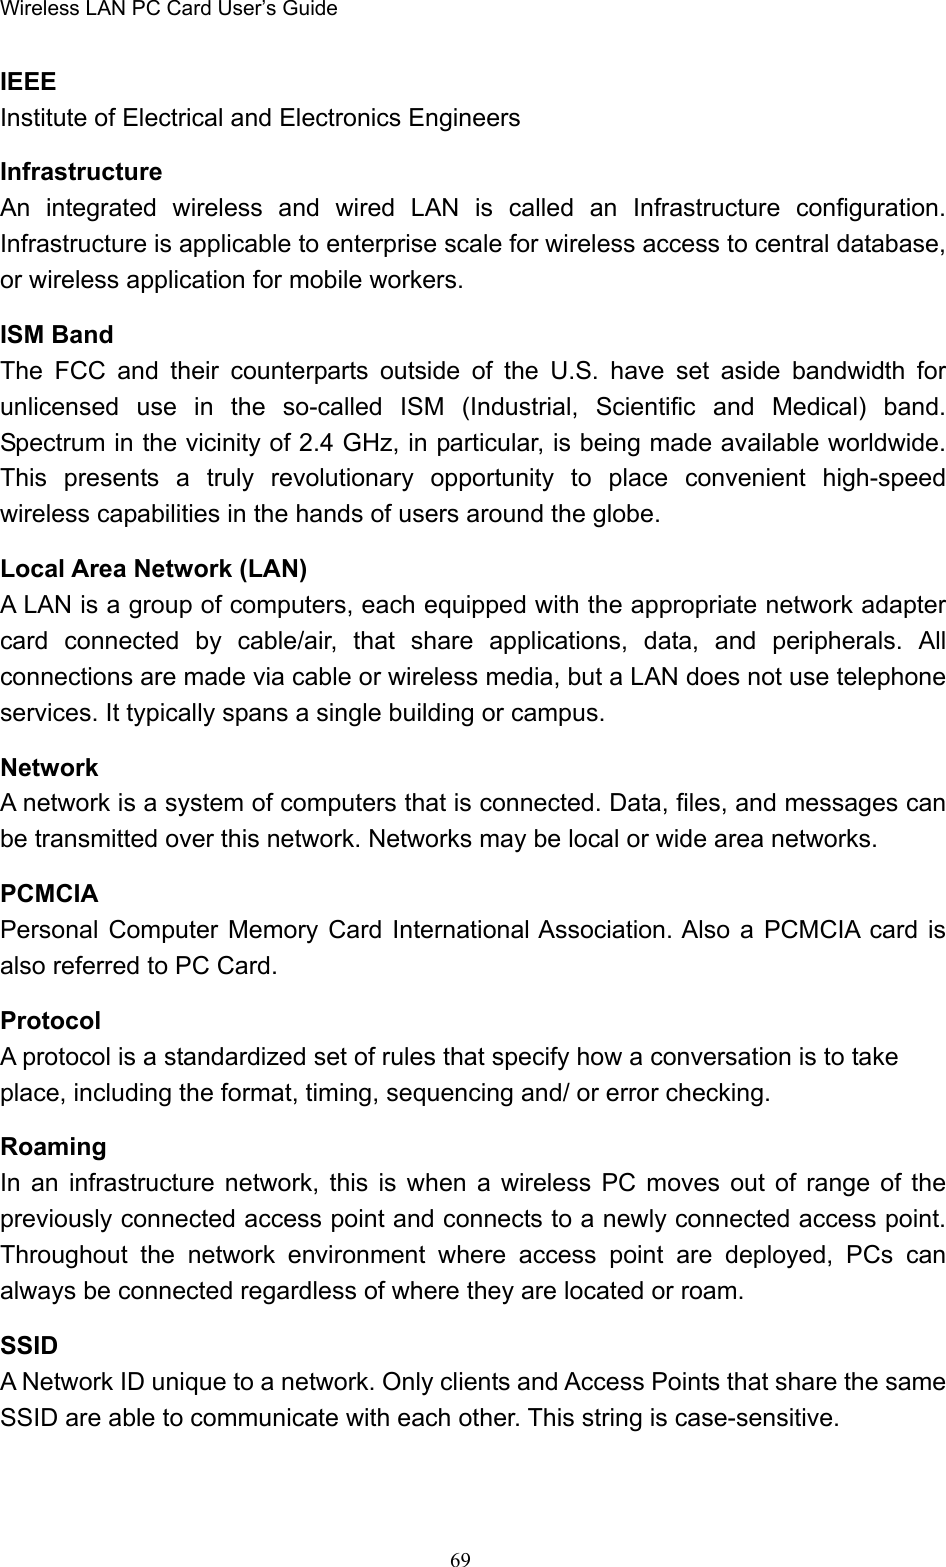 Wireless LAN PC Card User’s Guide69IEEEInstitute of Electrical and Electronics EngineersInfrastructureAn integrated wireless and wired LAN is called an Infrastructure configuration.Infrastructure is applicable to enterprise scale for wireless access to central database,or wireless application for mobile workers.ISM BandThe FCC and their counterparts outside of the U.S. have set aside bandwidth forunlicensed use in the so-called ISM (Industrial, Scientific and Medical) band.Spectrum in the vicinity of 2.4 GHz, in particular, is being made available worldwide.This presents a truly revolutionary opportunity to place convenient high-speedwireless capabilities in the hands of users around the globe.Local Area Network (LAN)A LAN is a group of computers, each equipped with the appropriate network adaptercard connected by cable/air, that share applications, data, and peripherals. Allconnections are made via cable or wireless media, but a LAN does not use telephoneservices. It typically spans a single building or campus.NetworkA network is a system of computers that is connected. Data, files, and messages canbe transmitted over this network. Networks may be local or wide area networks.PCMCIAPersonal Computer Memory Card International Association. Also a PCMCIA card isalso referred to PC Card.ProtocolA protocol is a standardized set of rules that specify how a conversation is to takeplace, including the format, timing, sequencing and/ or error checking.RoamingIn an infrastructure network, this is when a wireless PC moves out of range of thepreviously connected access point and connects to a newly connected access point.Throughout the network environment where access point are deployed, PCs canalways be connected regardless of where they are located or roam.SSIDA Network ID unique to a network. Only clients and Access Points that share the sameSSID are able to communicate with each other. This string is case-sensitive.